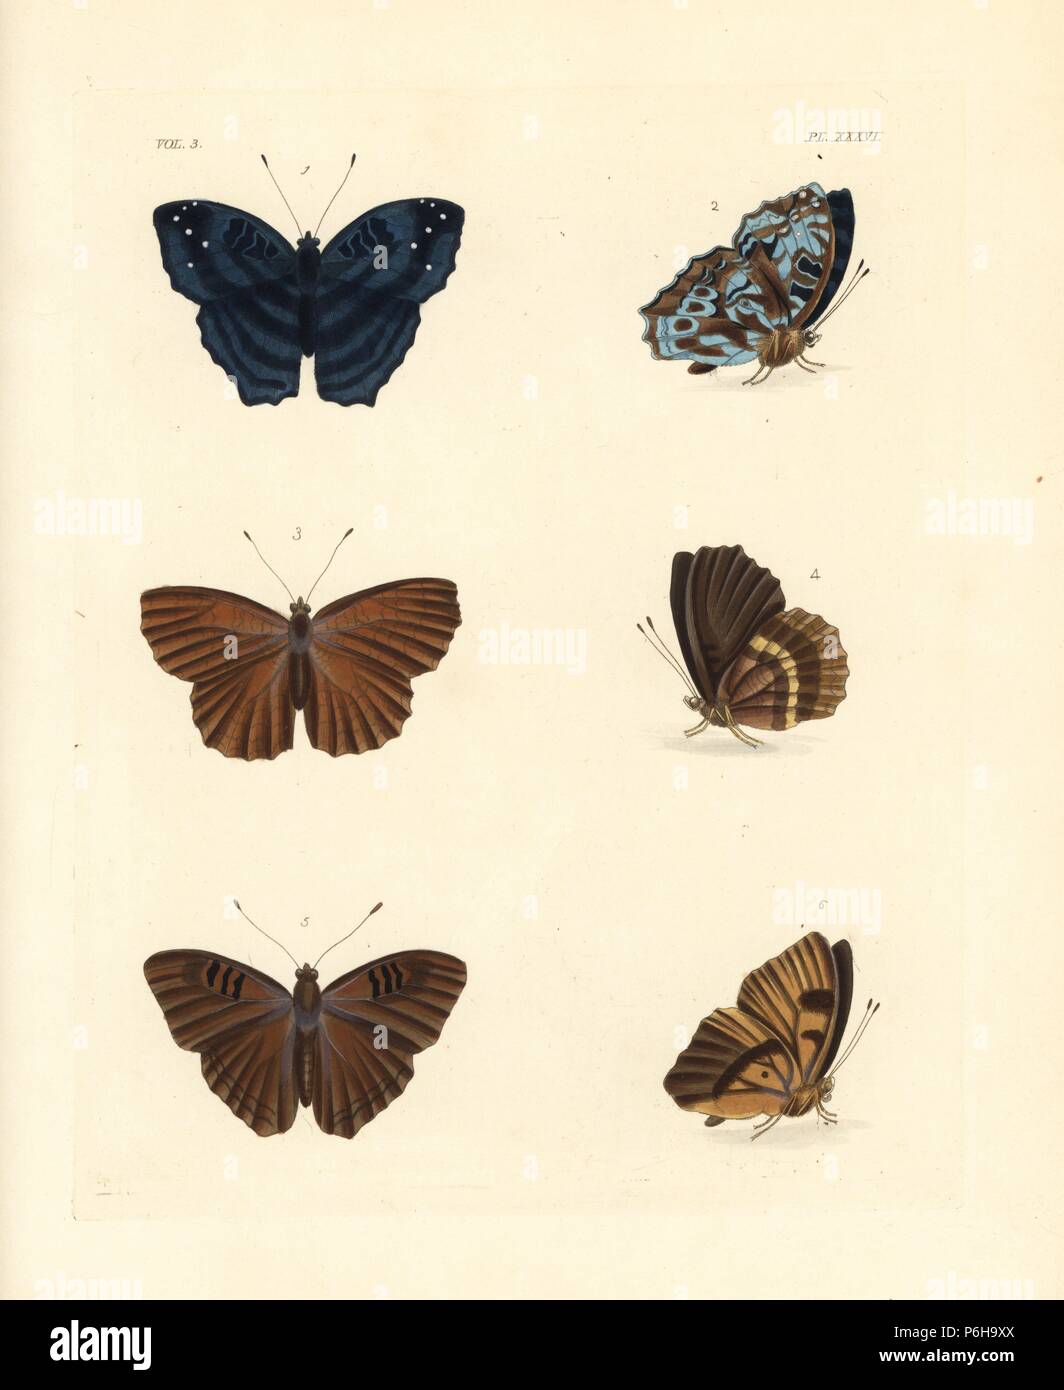 Brilliant nymph, Cynandra opis Nymphalis afer 1,2, Papilio Nymphalis alphaea 3,4, and doriclea nymph, Euriphene doriclea, Nymphalis doriclaea 5,6. Handcoloured lithograph from John O. Westwood's new edition of Dru Drury's 'Illustrations of Exotic Entomology,' Bohn, London, 1837. Stock Photo